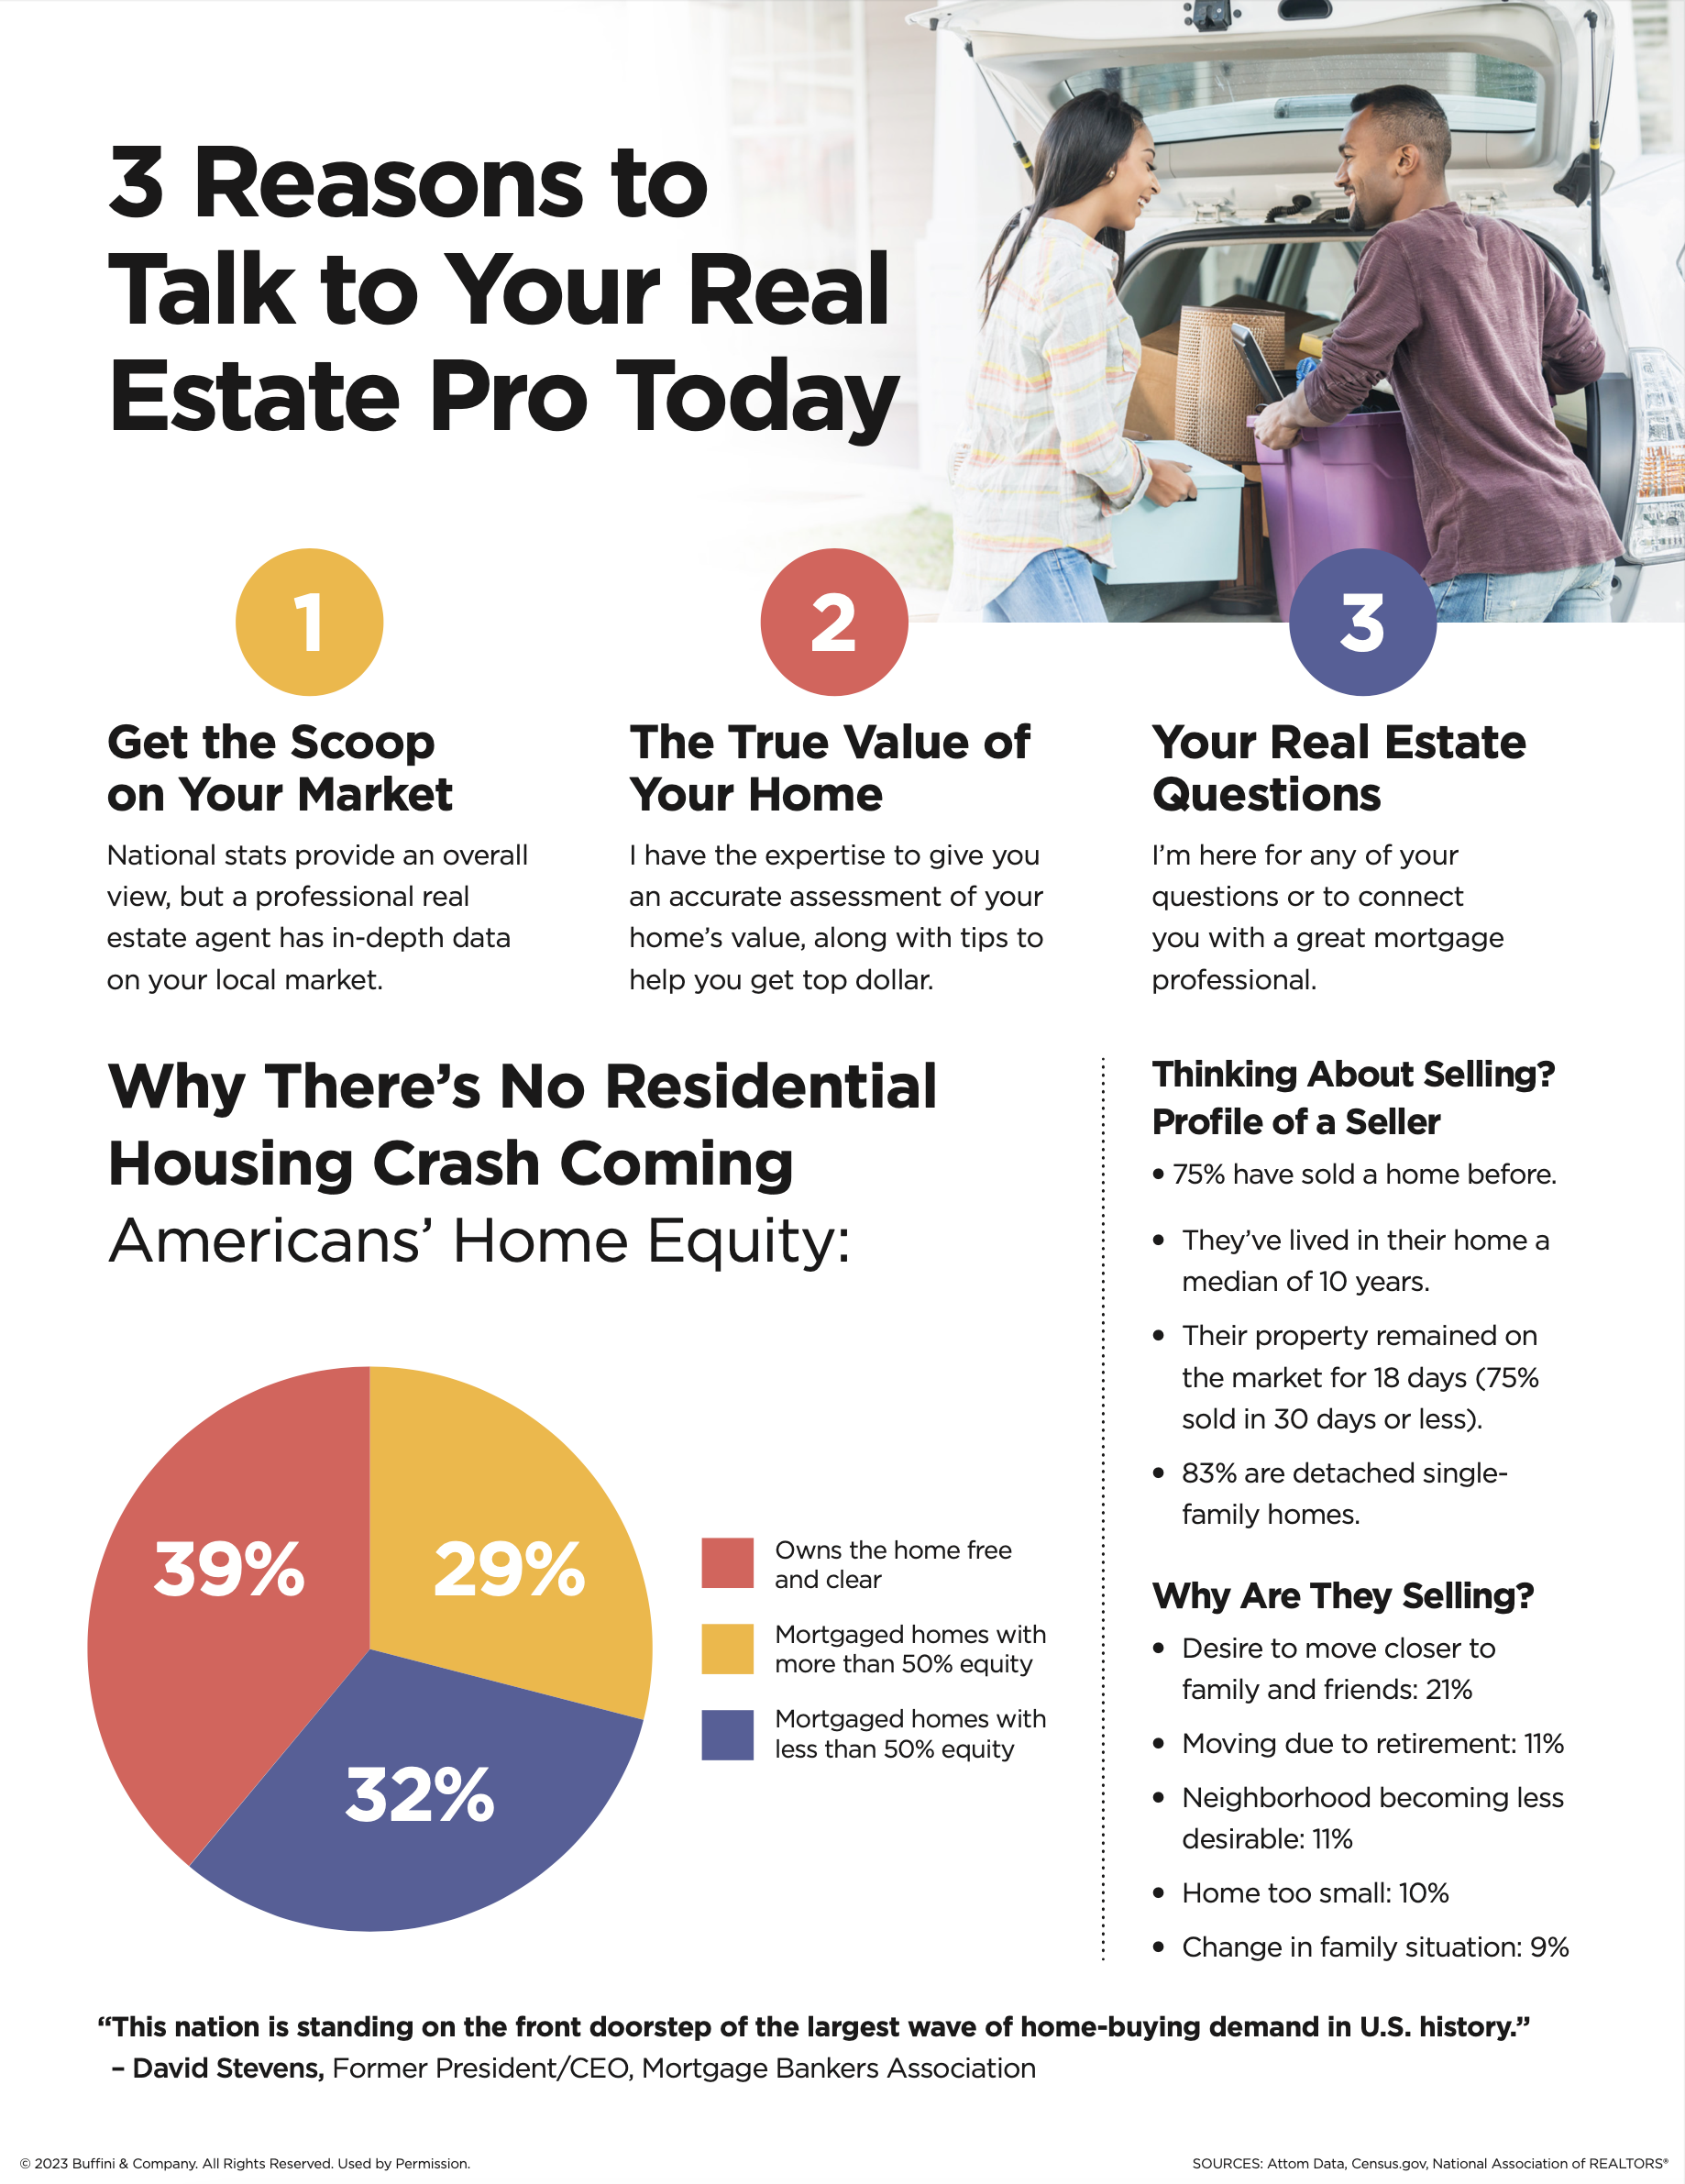 3 Reasons to Talk to Your Real Estate Pro Today | RE/MAX Results | Hoosier Home Listings | Michael Archbold